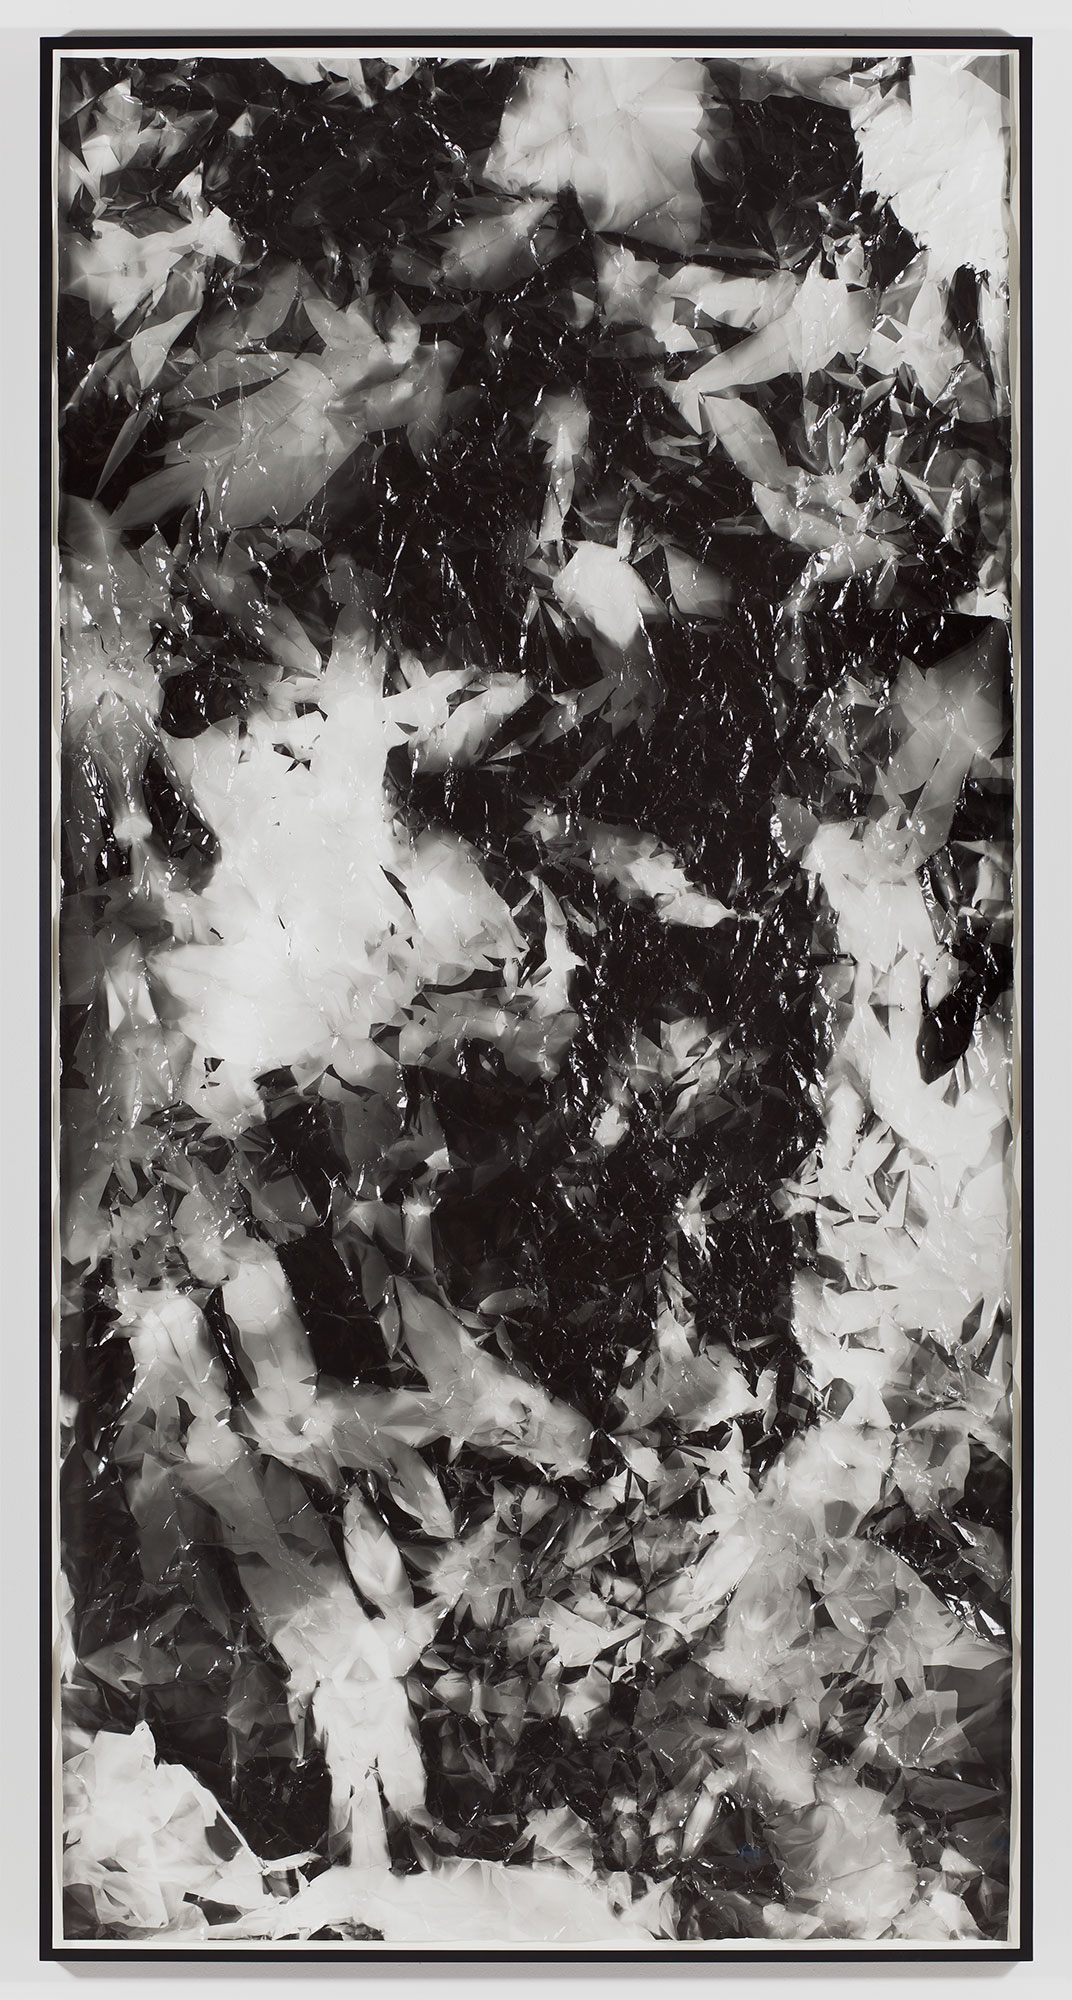   Picture Made by My Hand with the Assistance of Light    2011   Black and white fiber based photographic paper  55 inches    